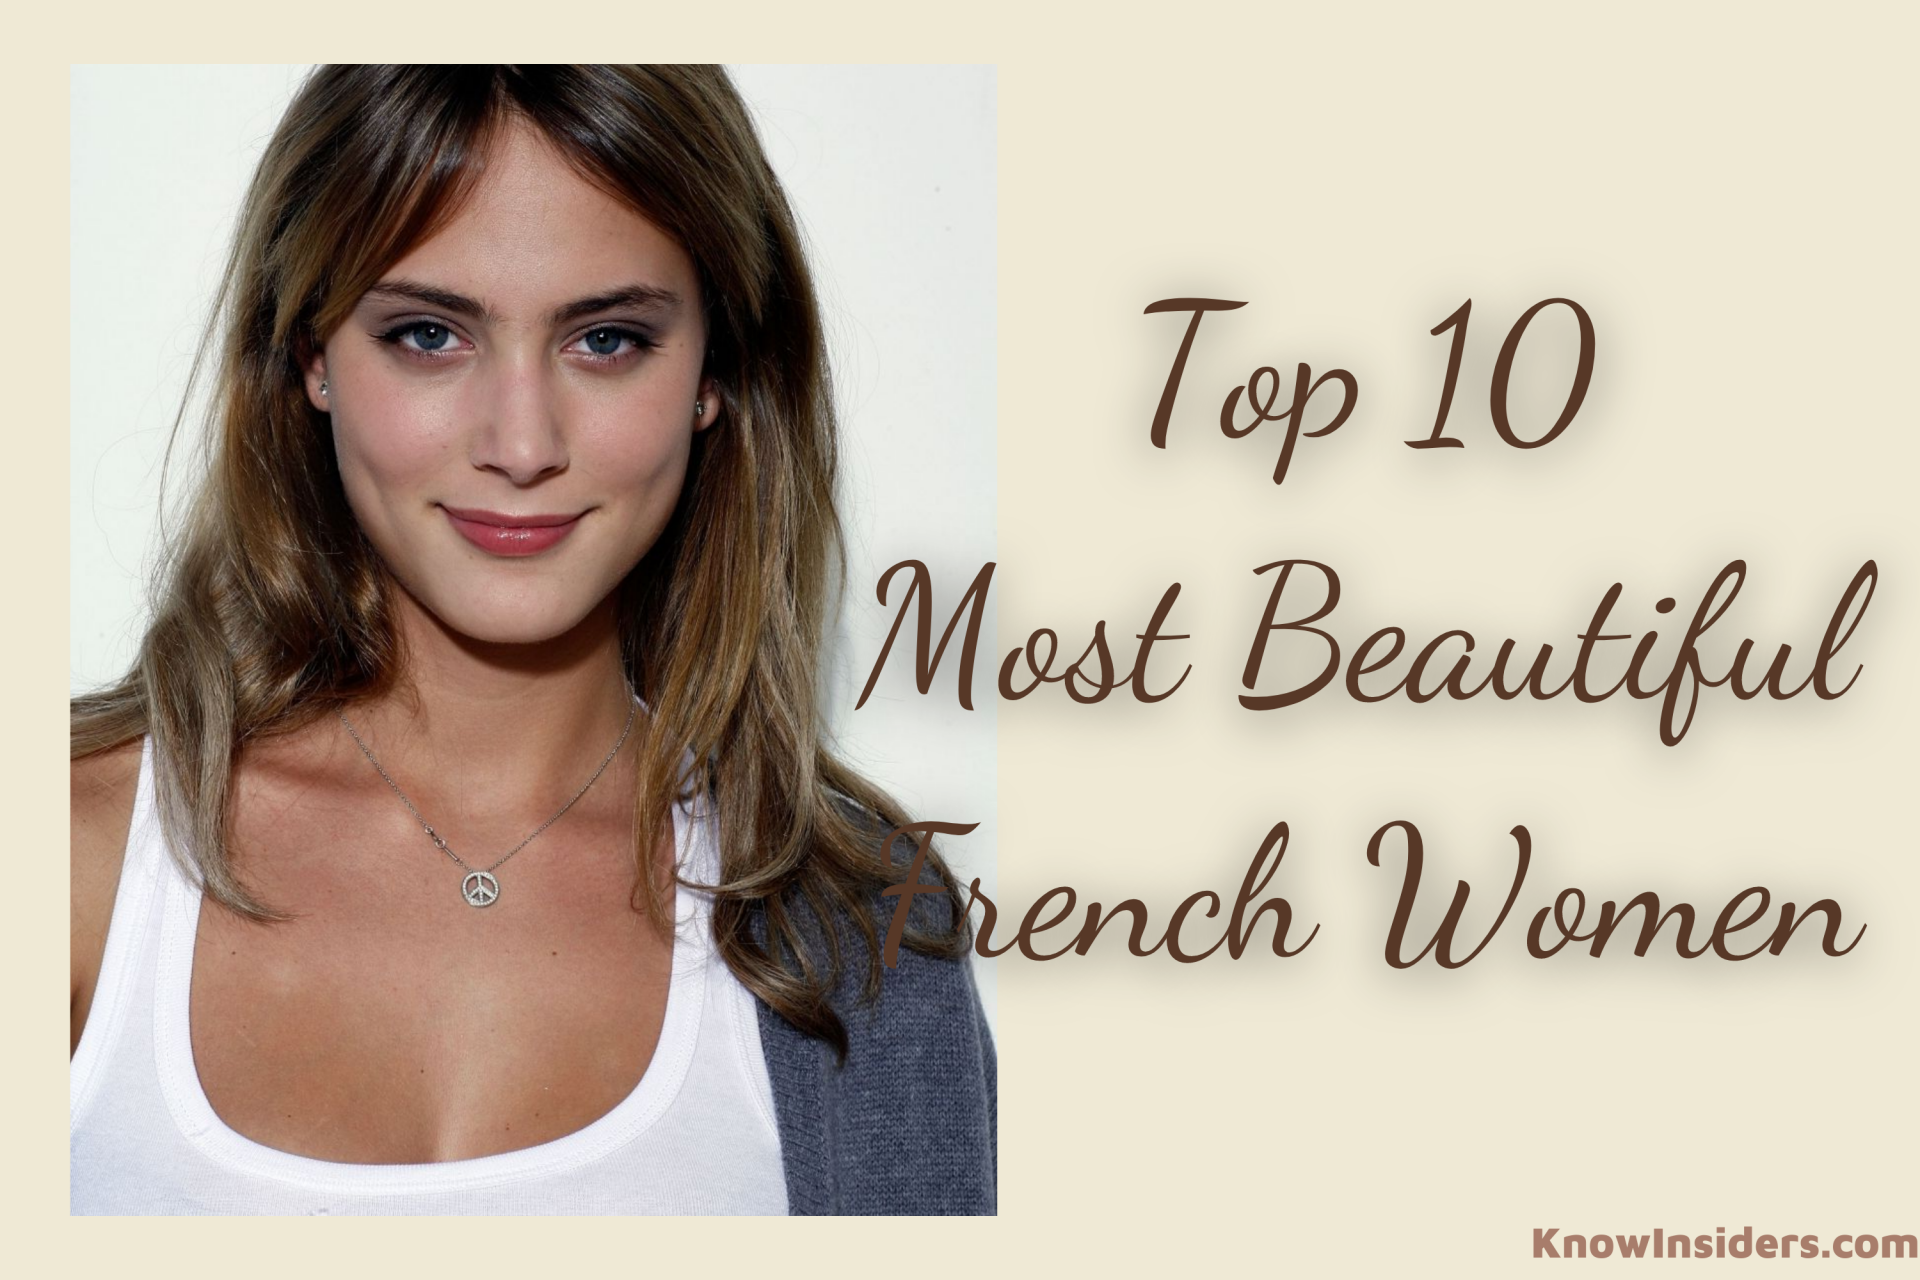 Top Most Beautiful And Sexiest Women From Around The World 2022 2023